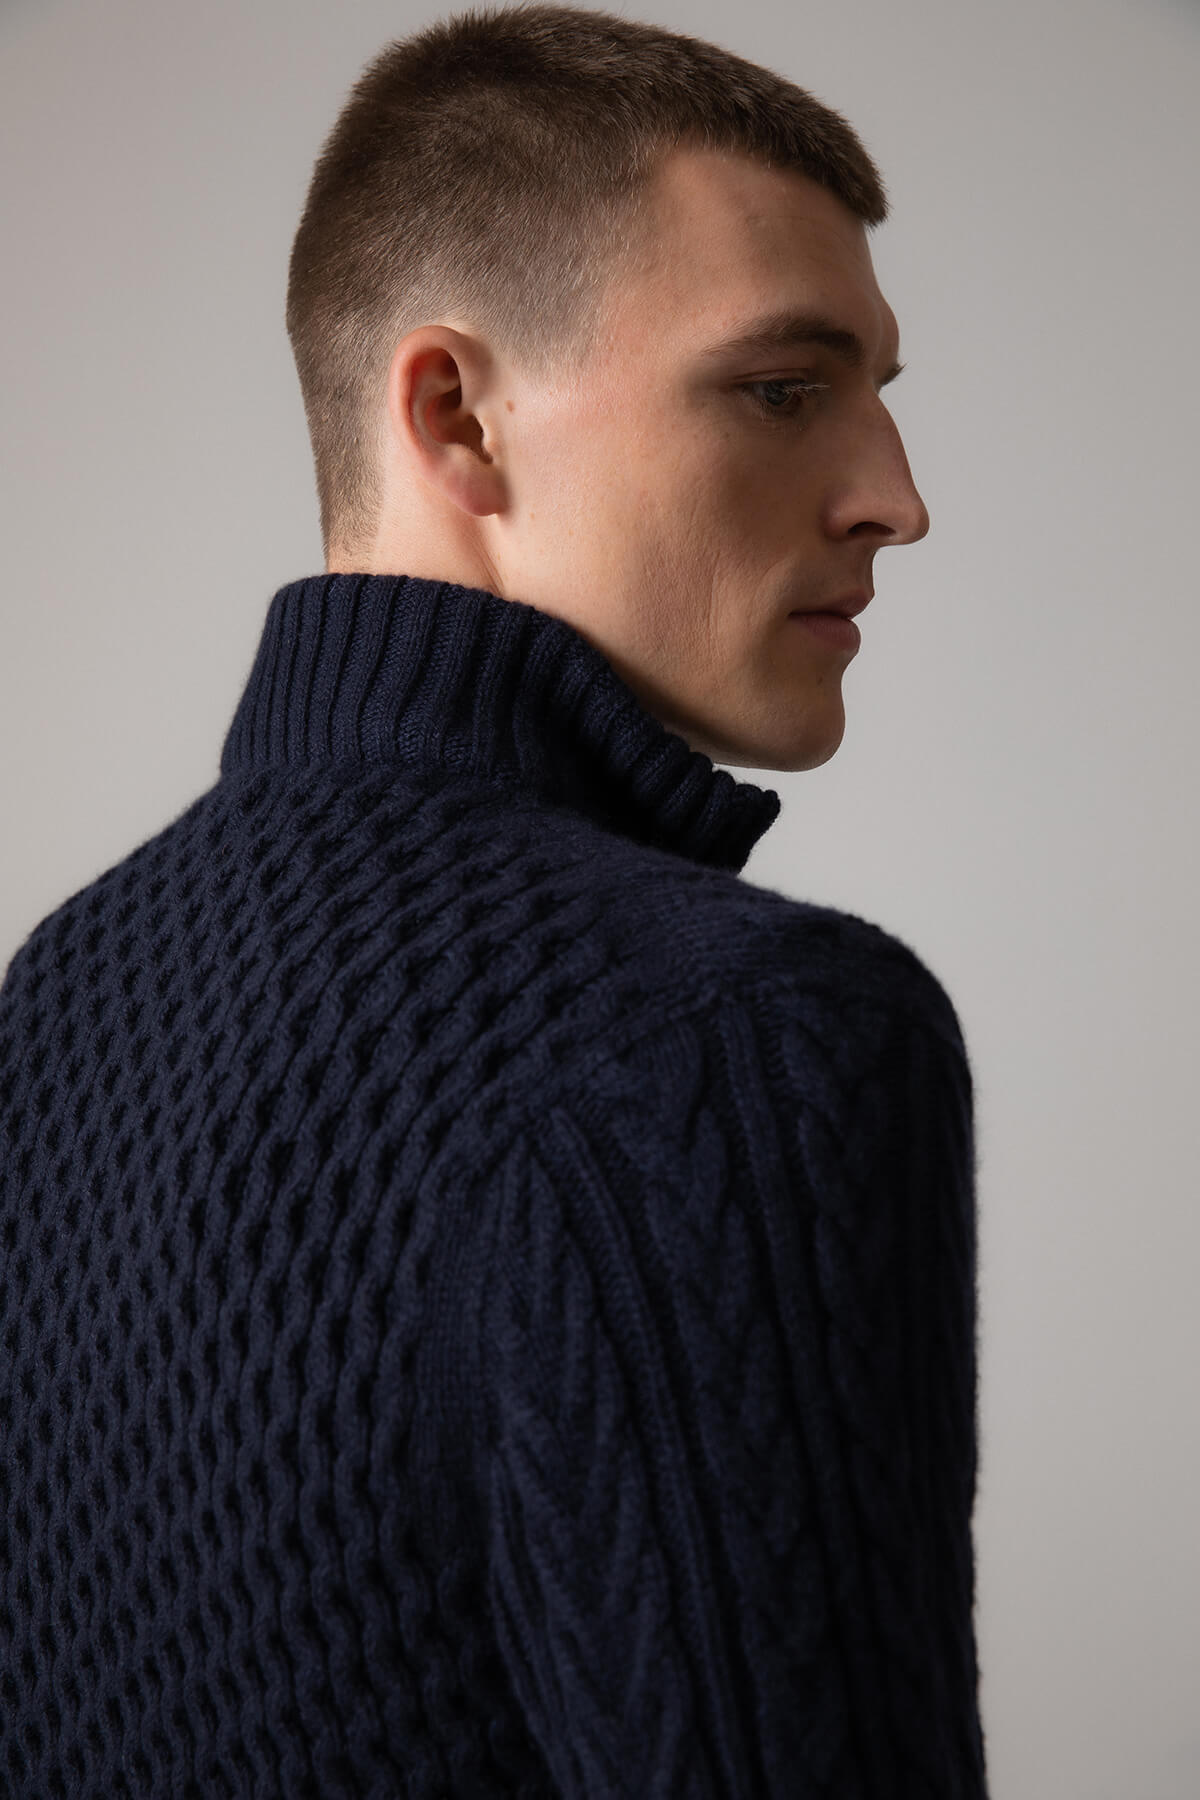 Johnstons of Elgin’s Men's Aran Cable Cashmere Zip Cardigan in Dark Navy on model on a grey background KAI05119Q23706